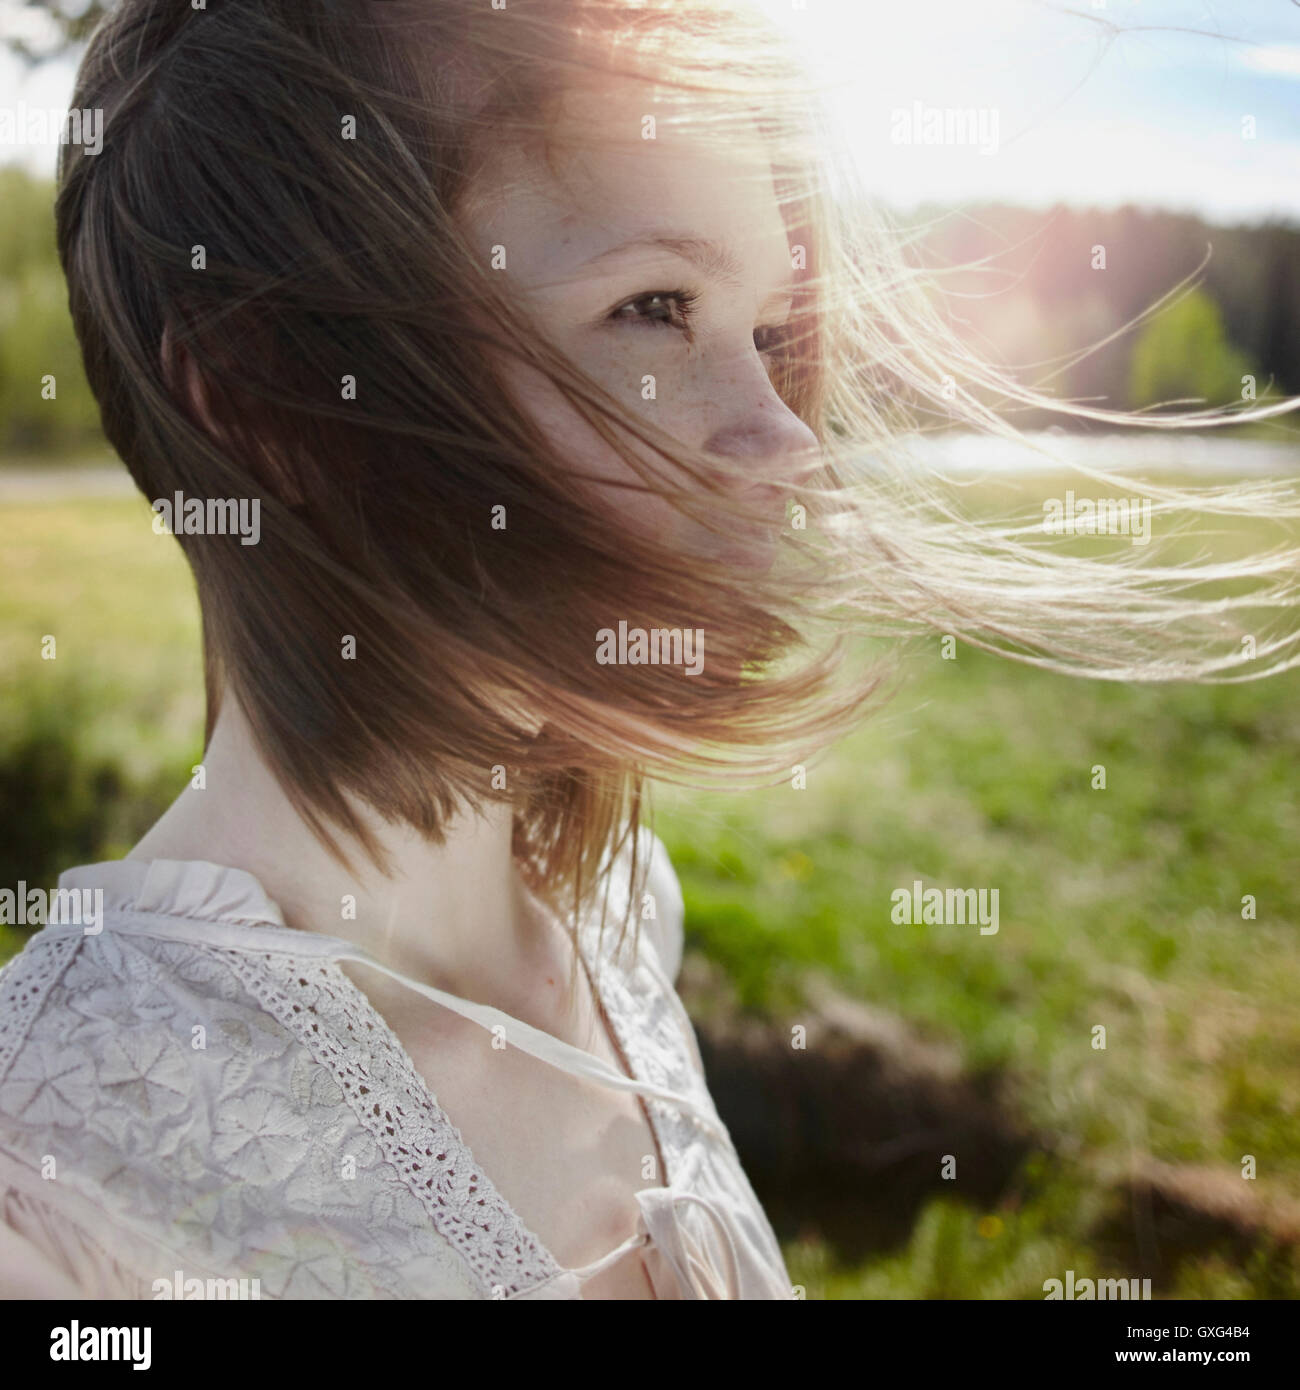 Caucasian girl with hair blowing in wind Stock Photo